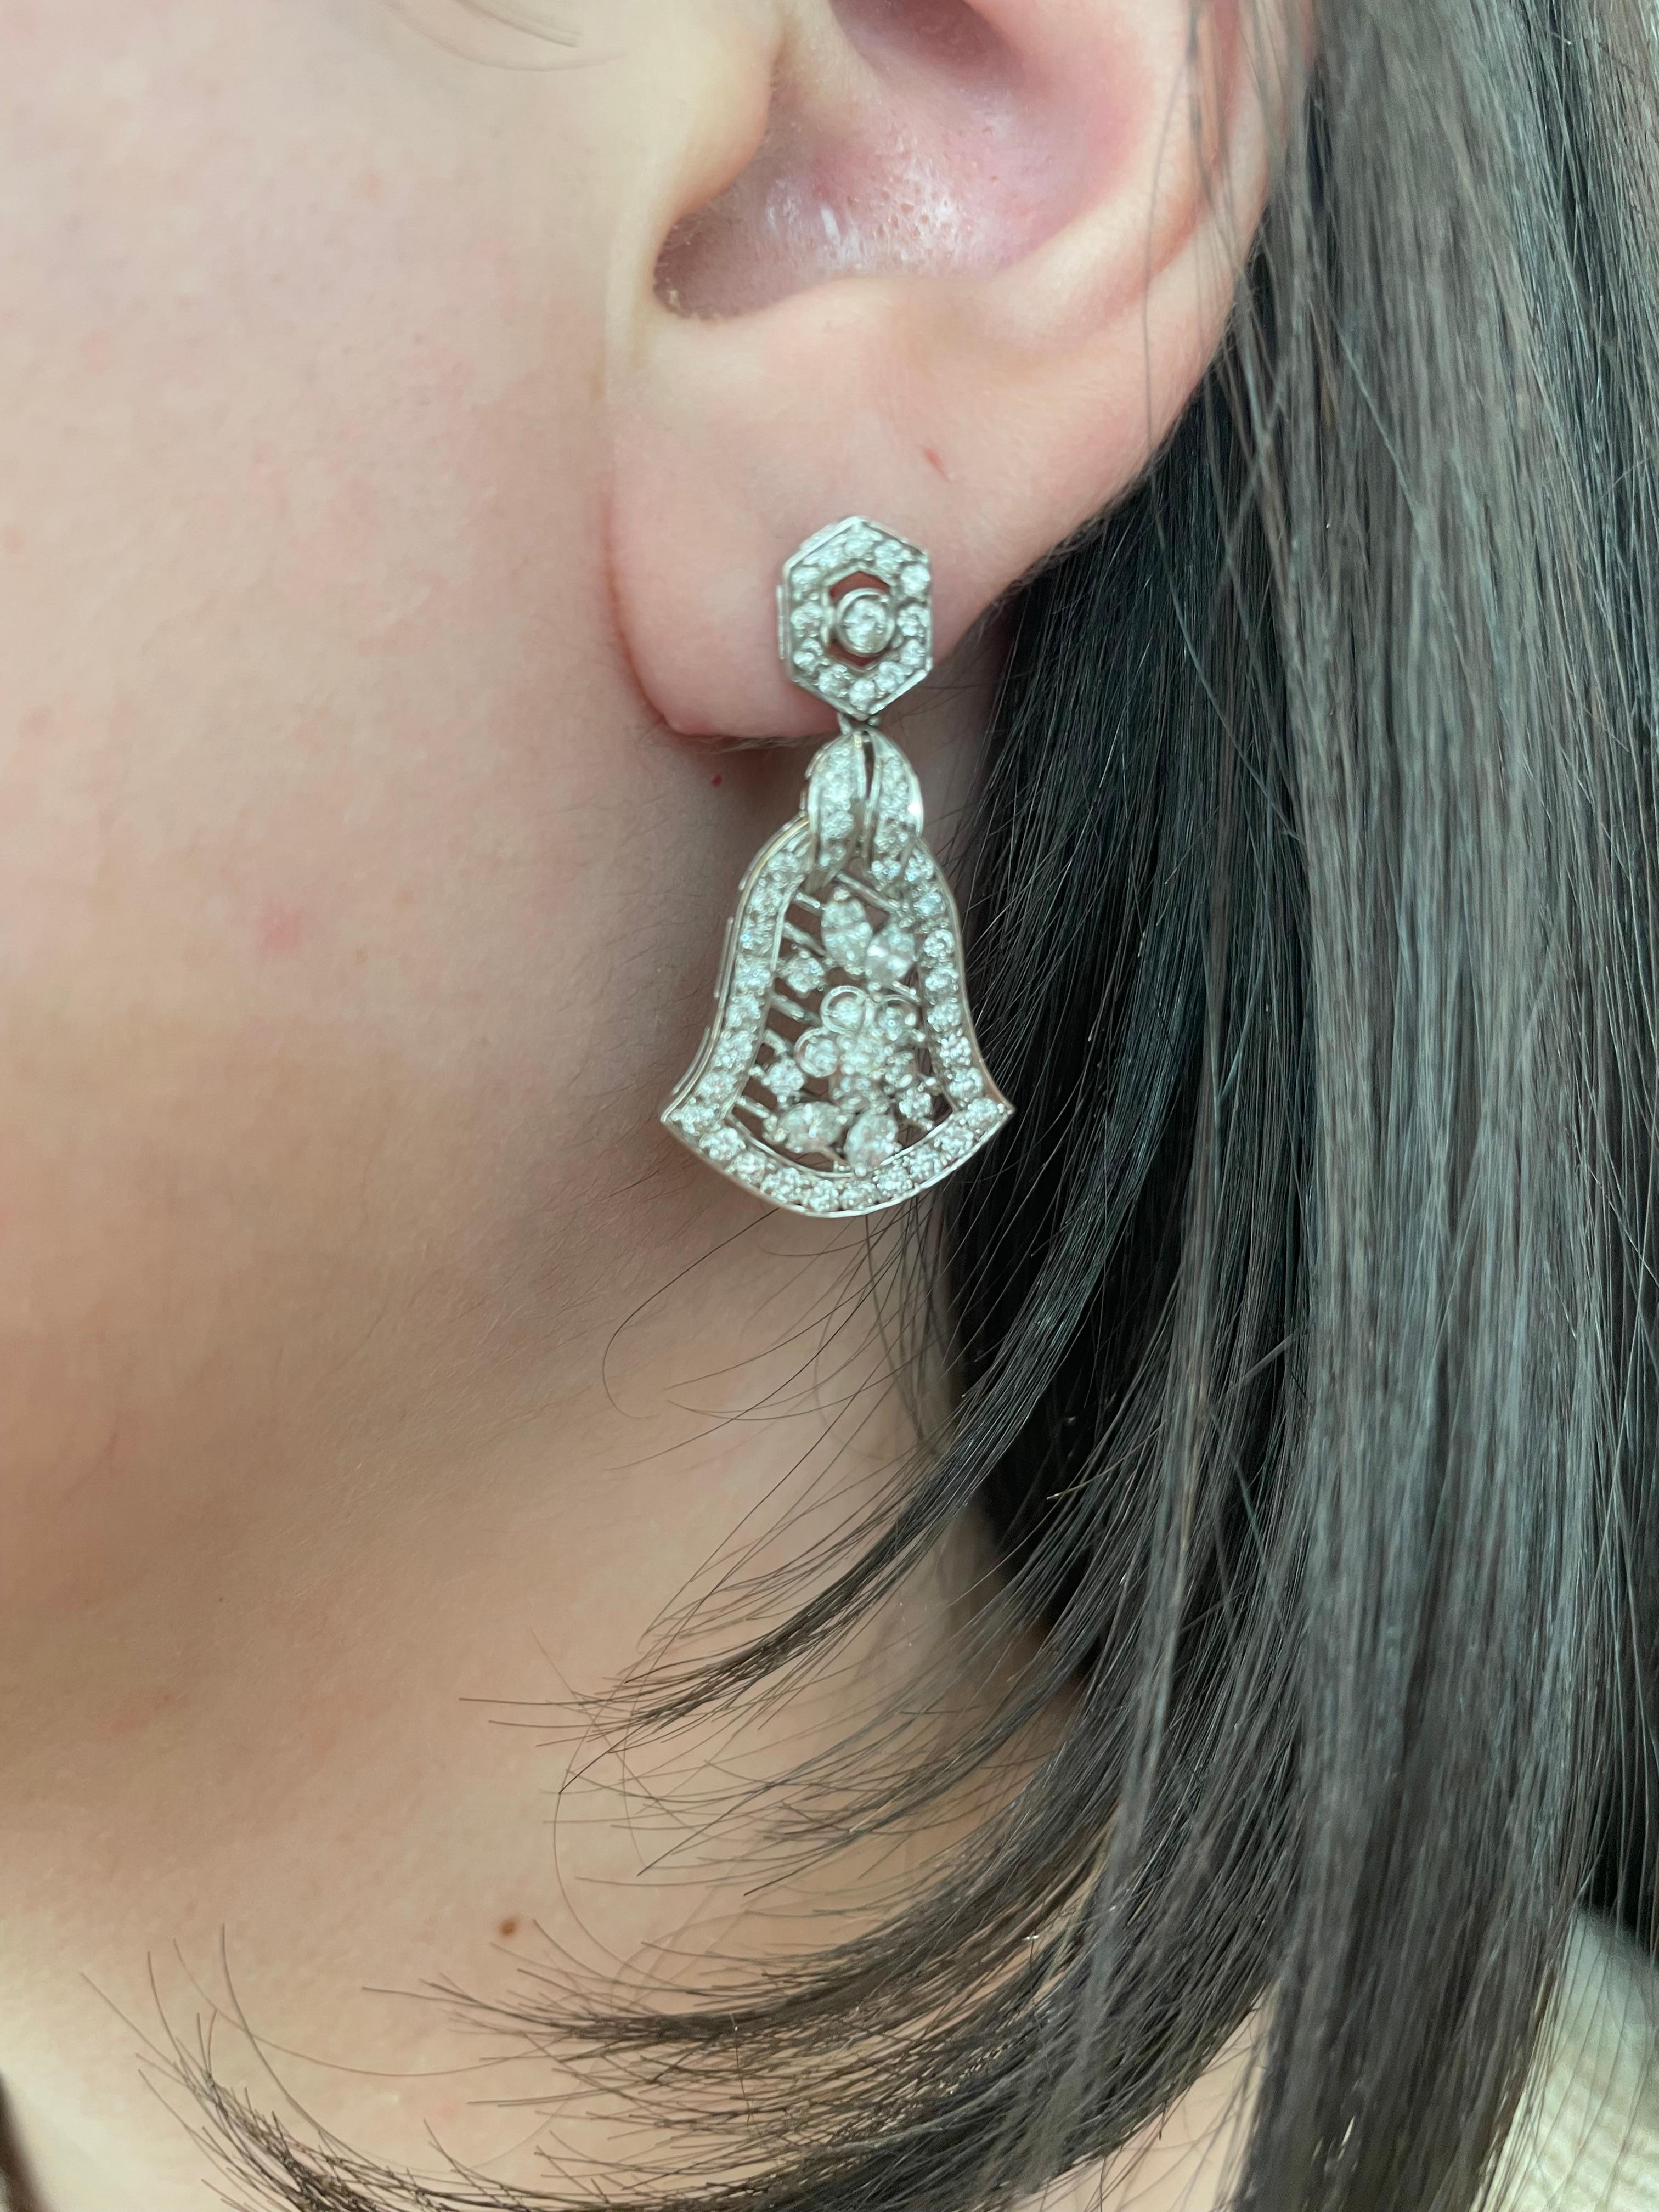 Beautiful Art Deco inspired bell motif earrings
Round cut diamonds approximately 1ct, H/I color, and SI clarity. 18-karat white gold with millgrain work. 1 inch. 
Accommodated with an up to date appraisal by a GIA G.G. upon request. Please contact